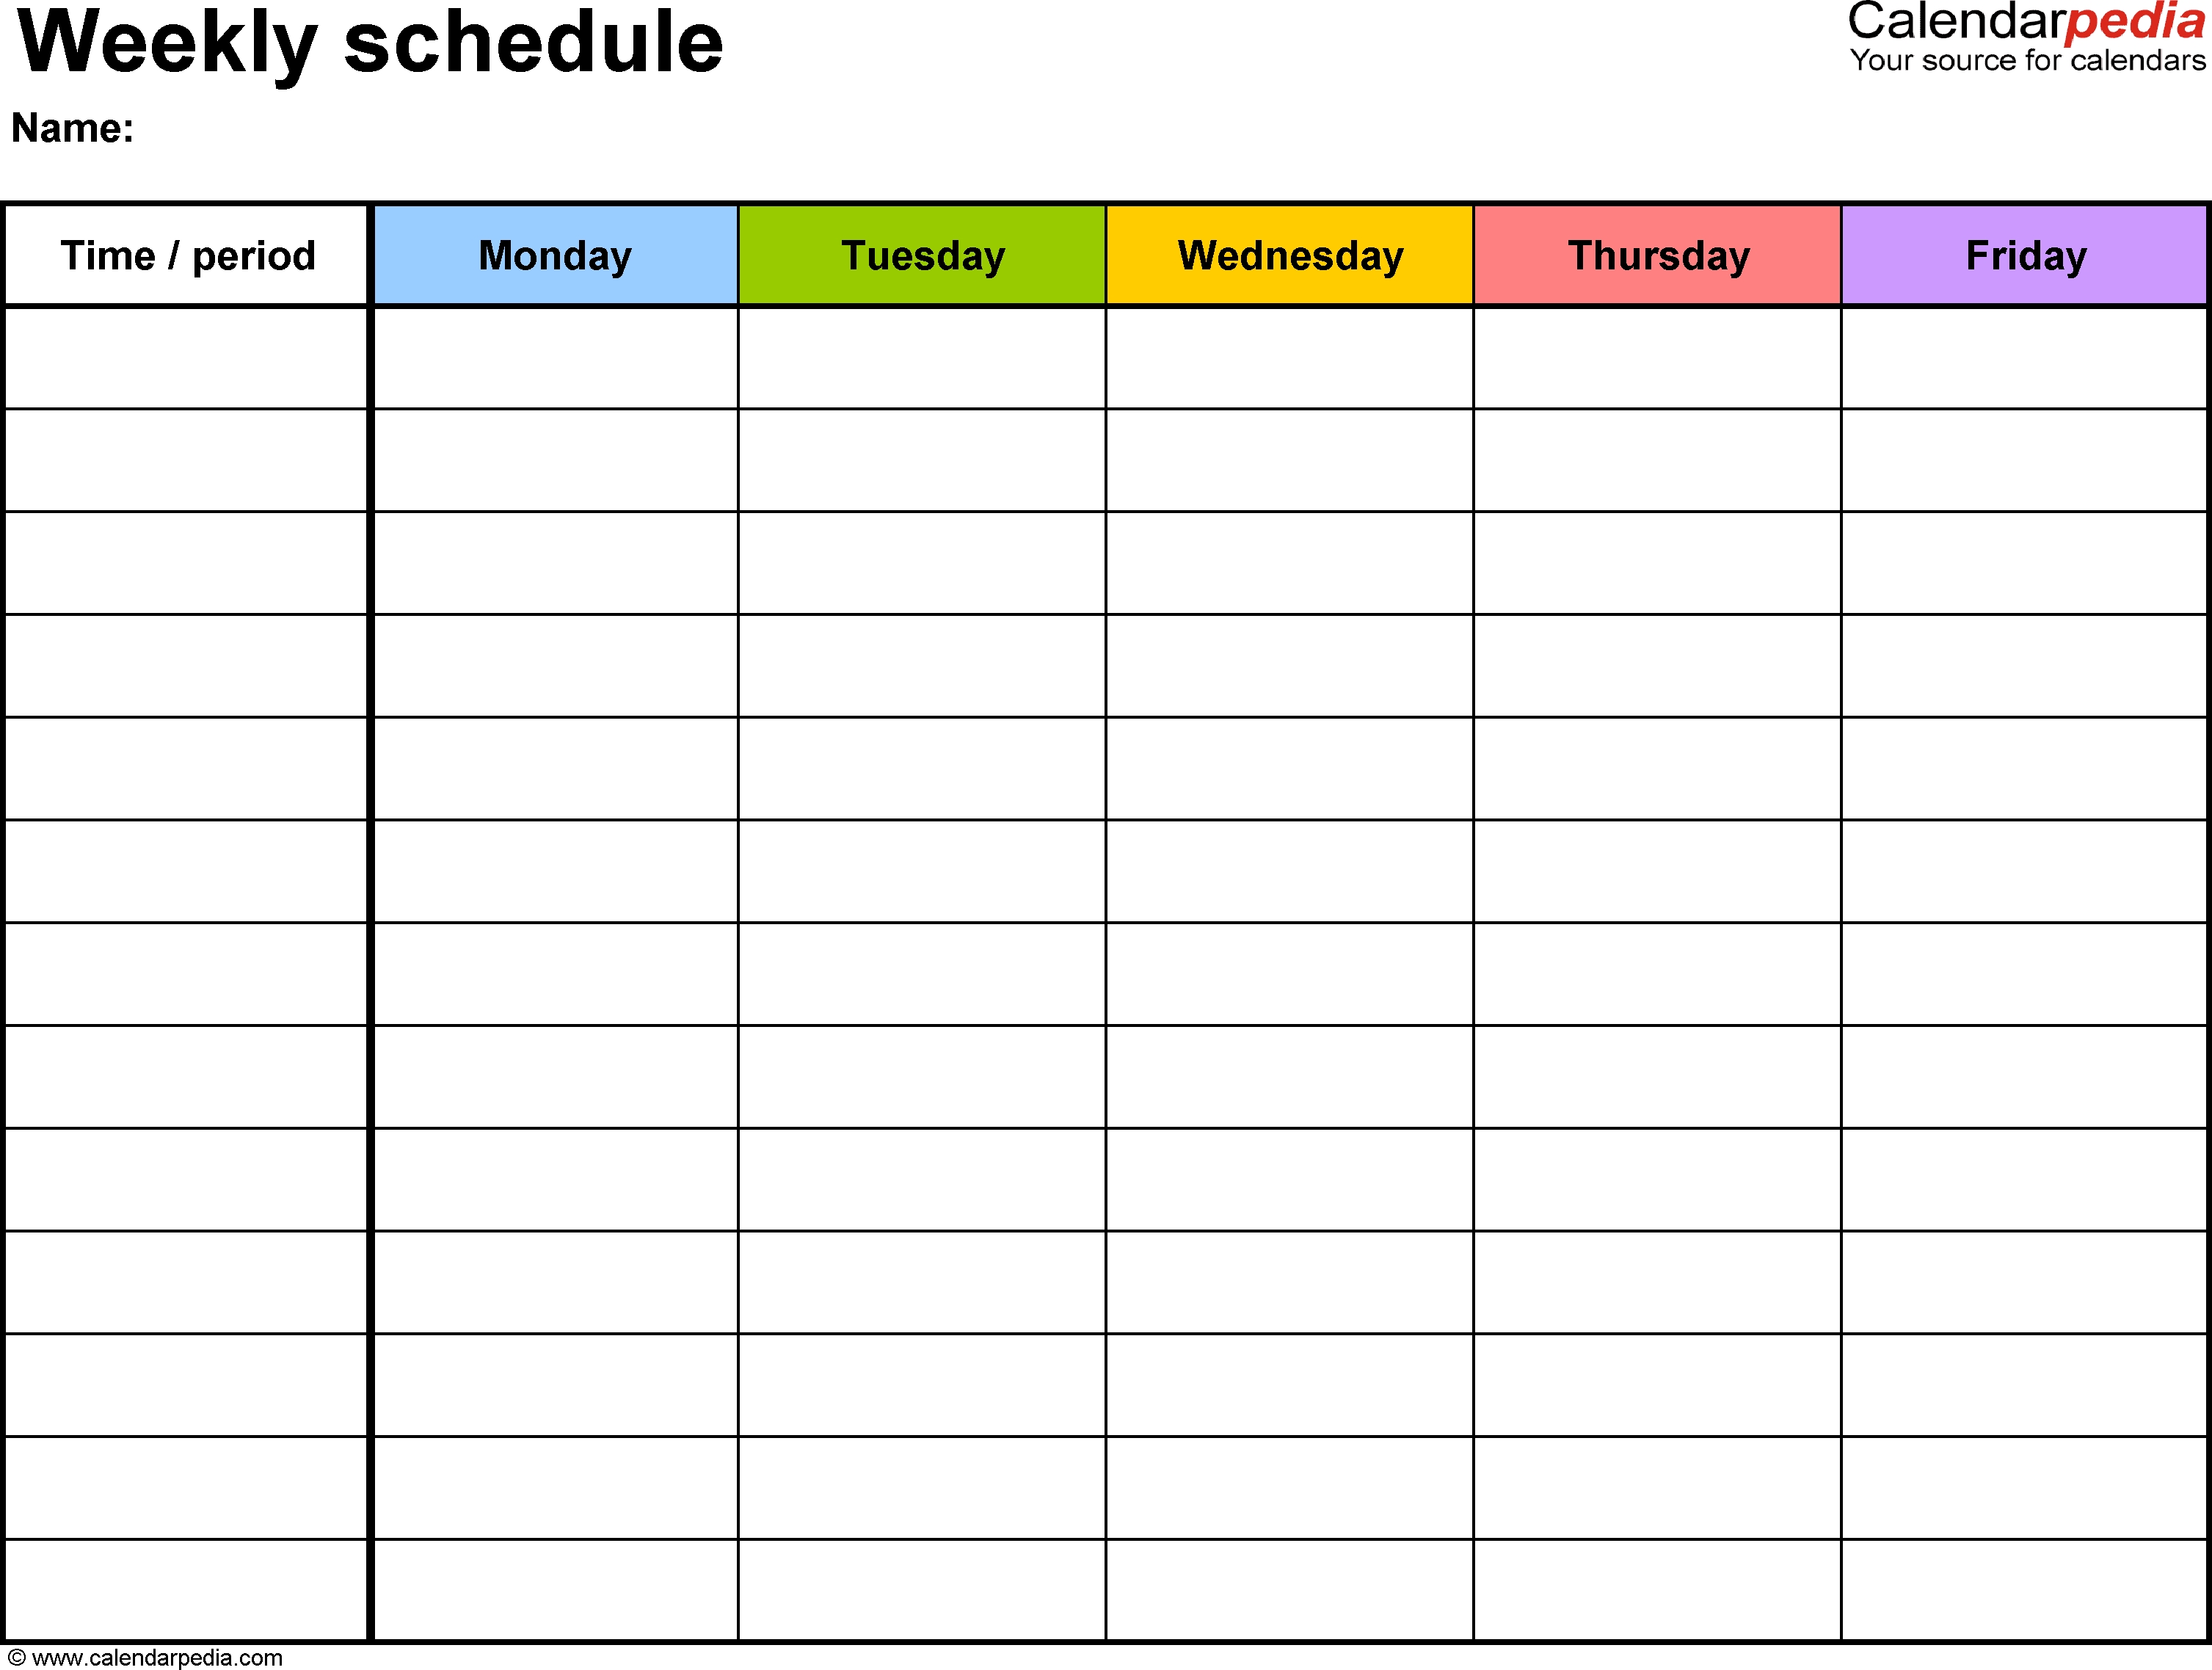 Free Weekly Schedule Templates For Word - 18 Templates-Monday To Friday Template